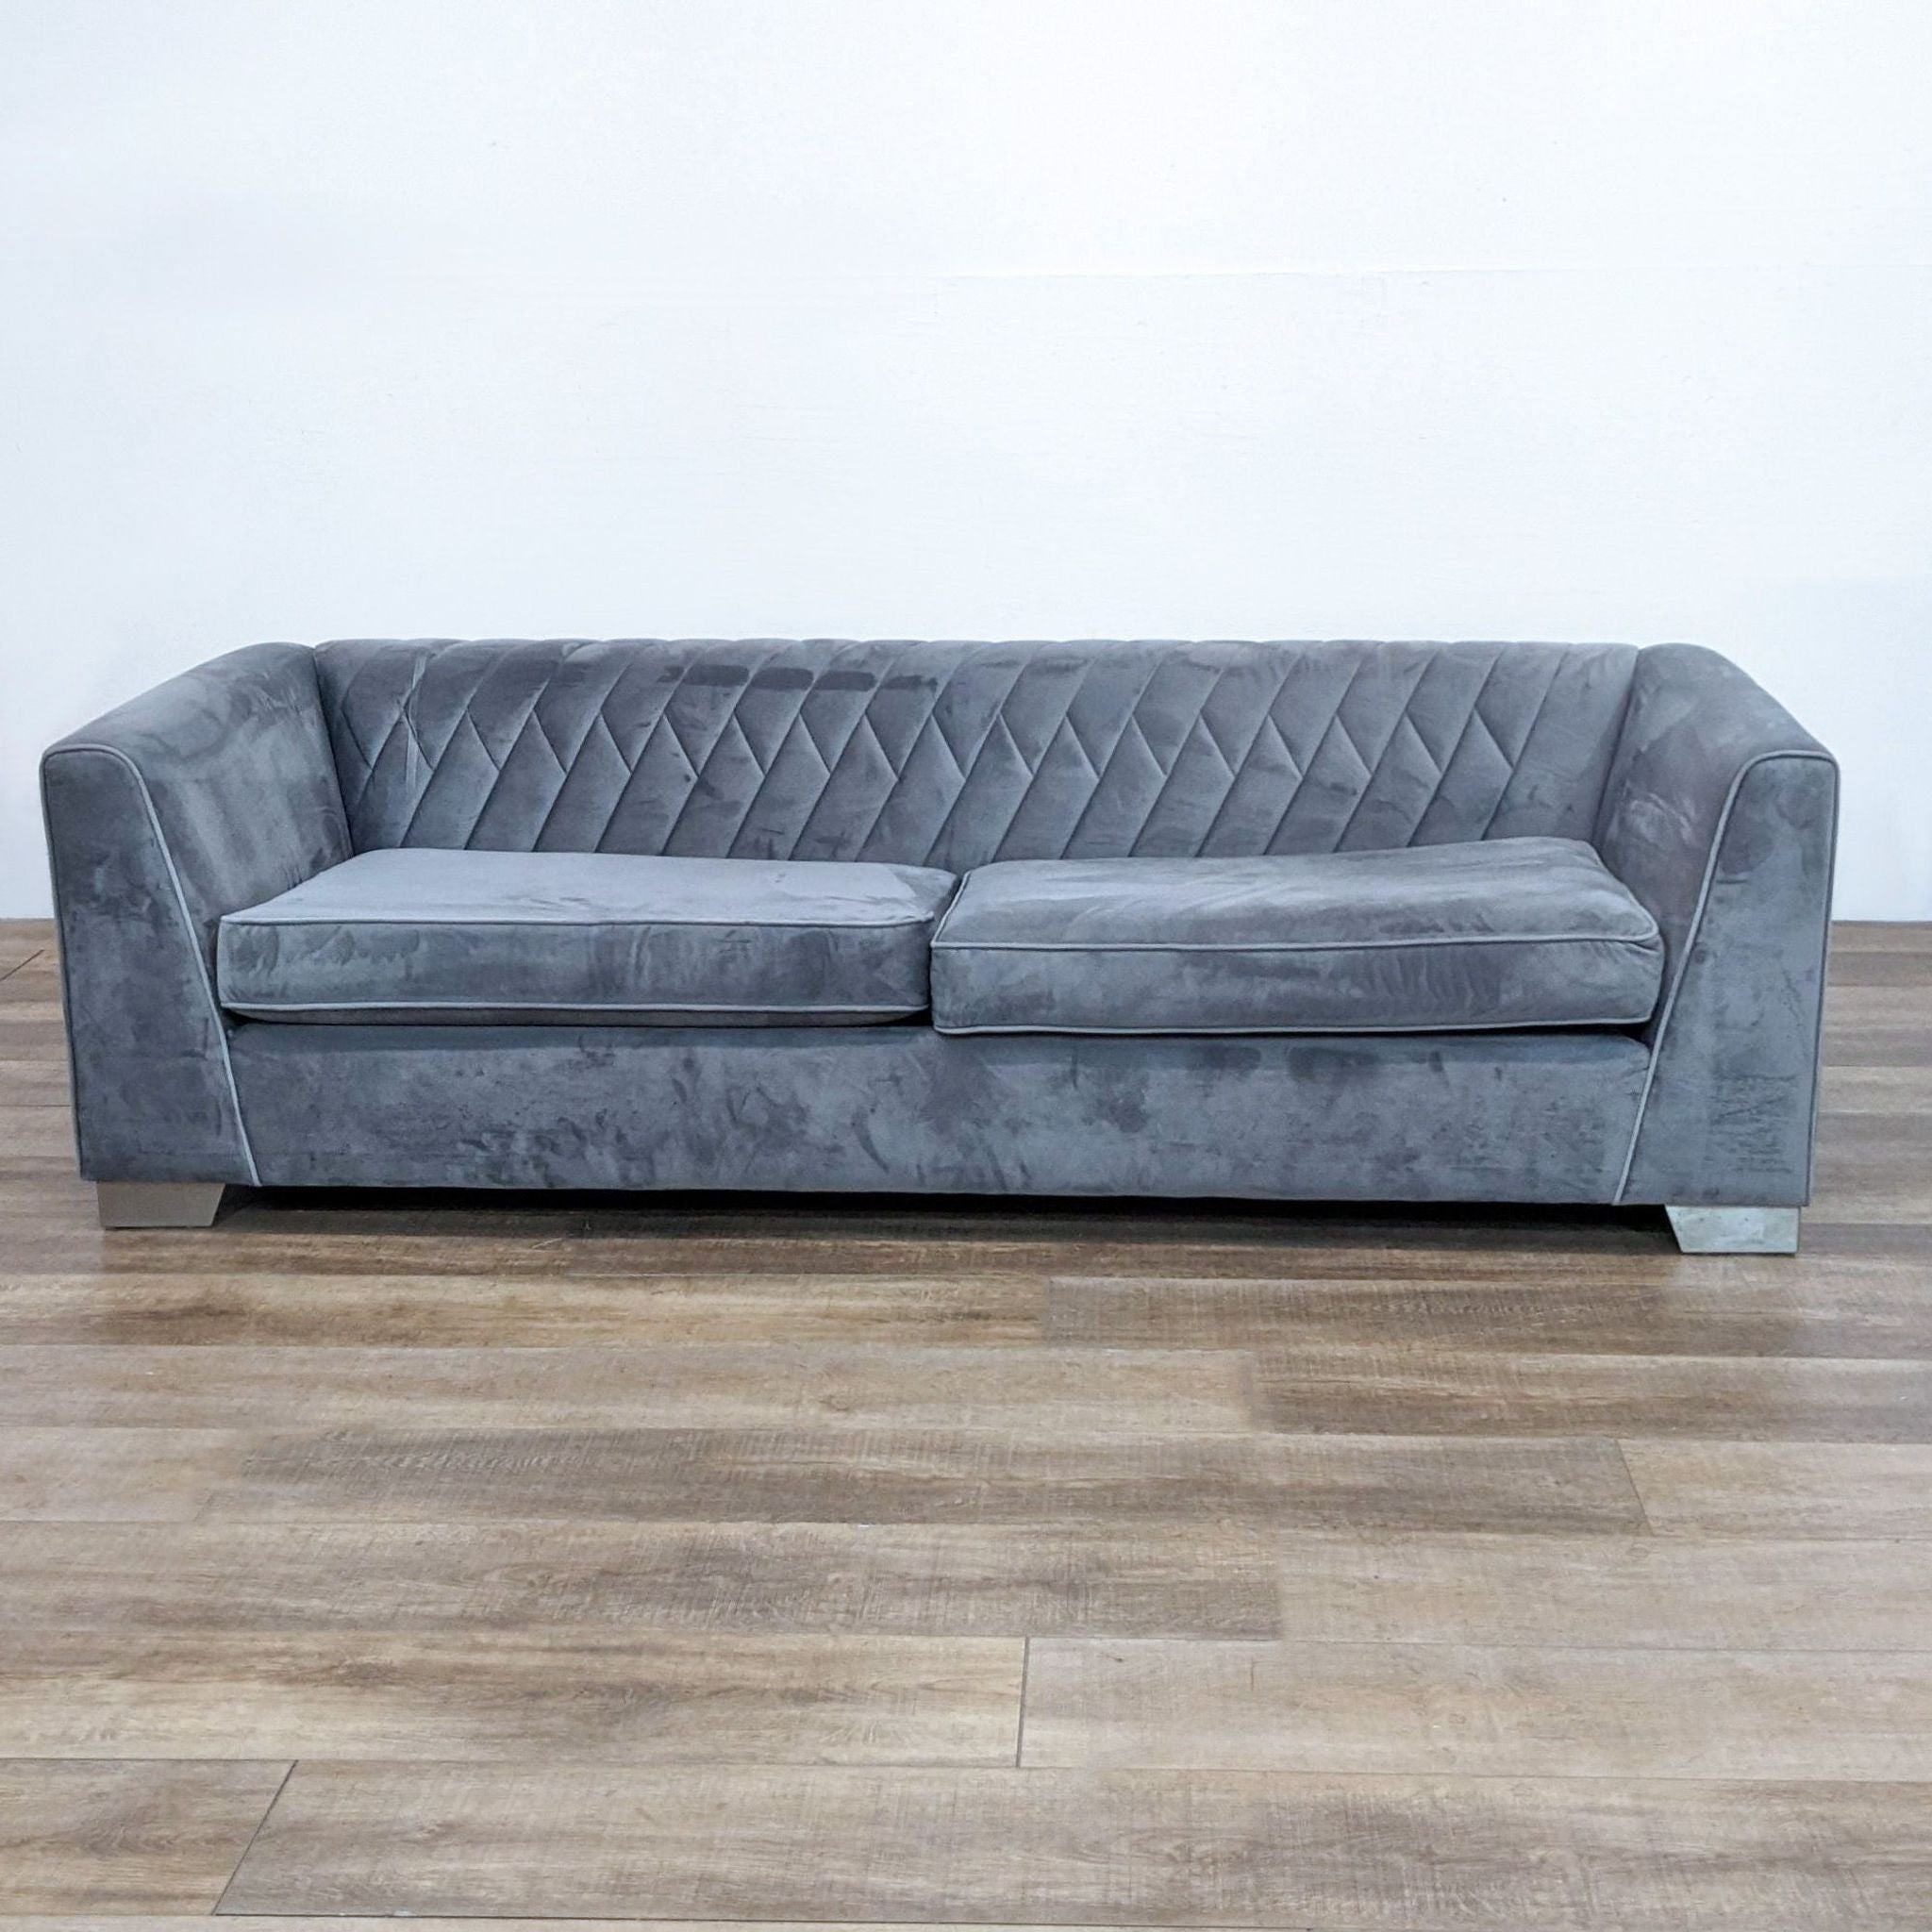 Alt text 1: Armen Living gray 3-seat sofa, tufted back, clean lines, with silver finish feet on a wood floor.